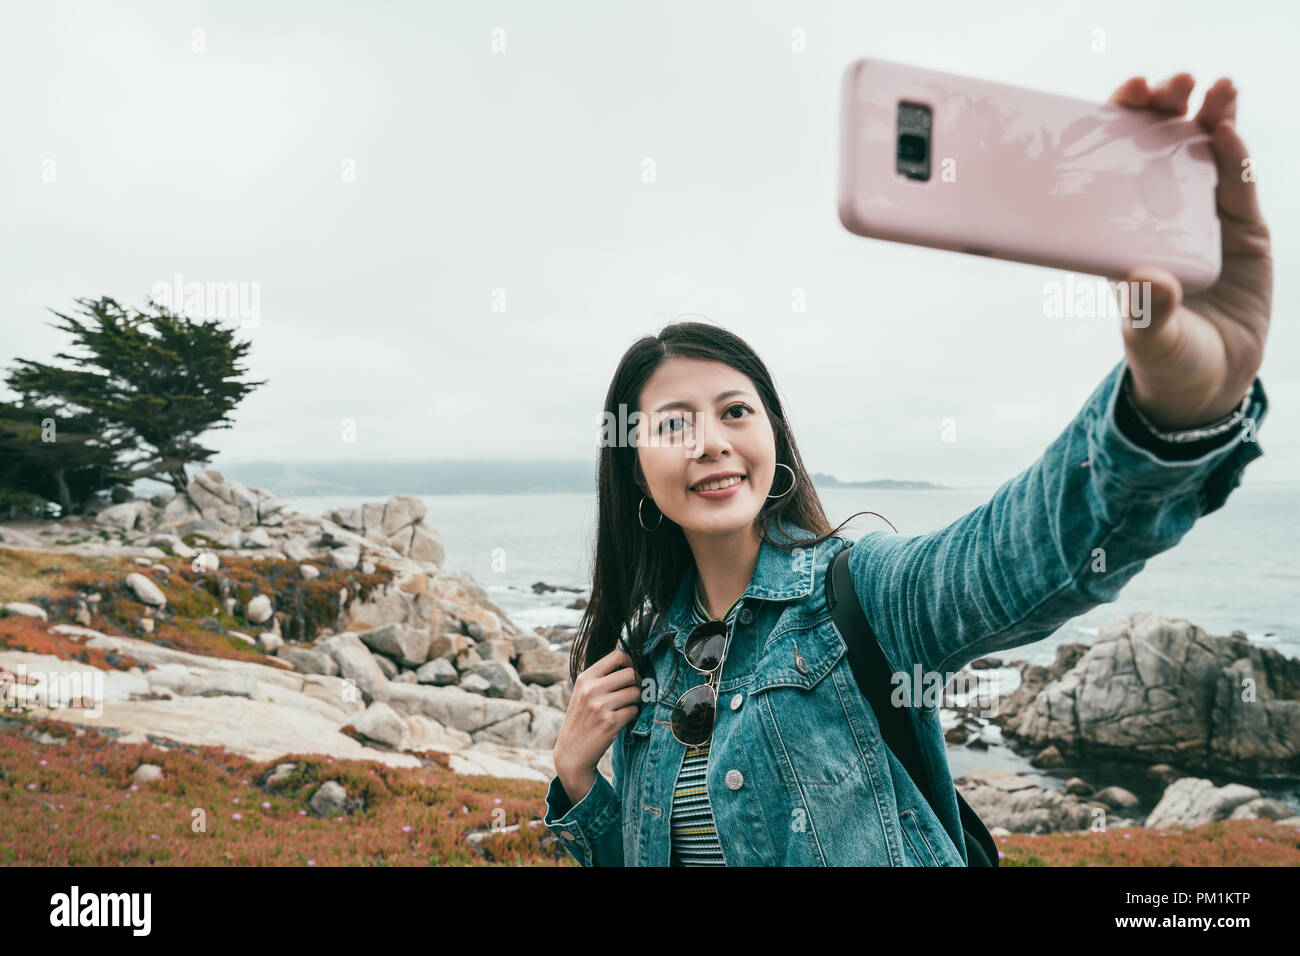 young lovely woman taking selfies at the beach by her cell phone in a small and quiet town. Stock Photo